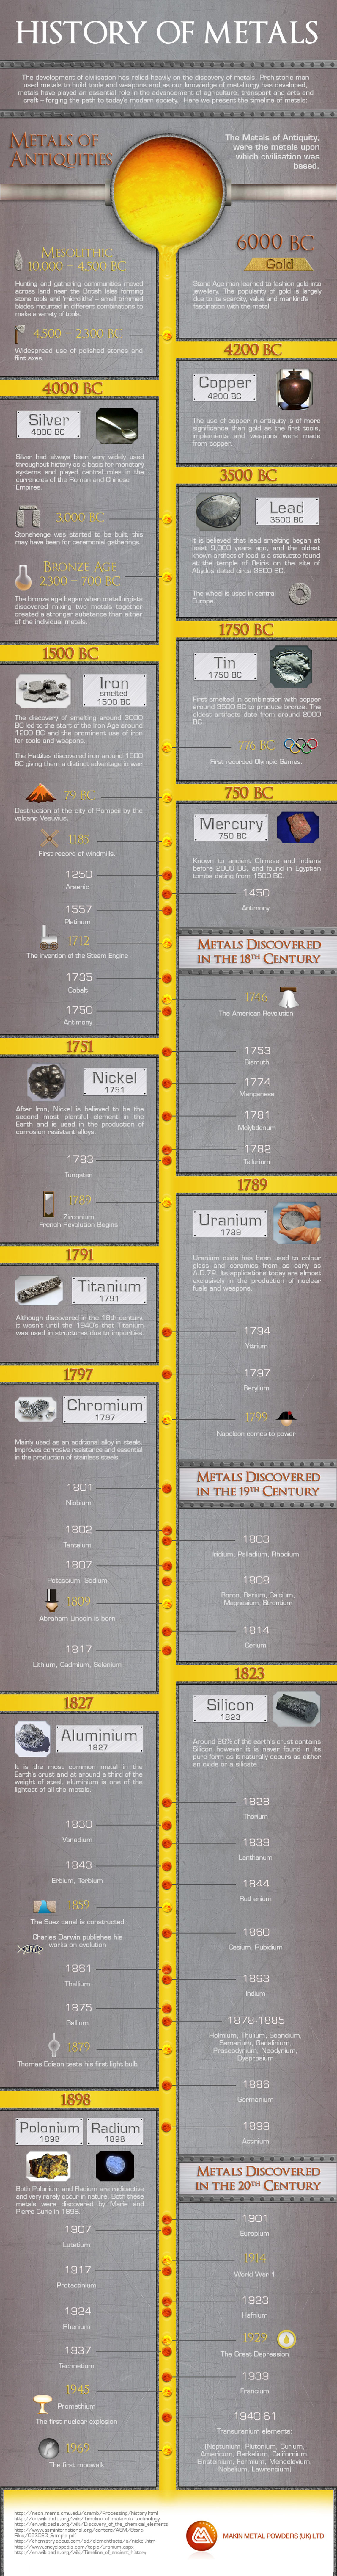 History of Metals - Timeline Infographic